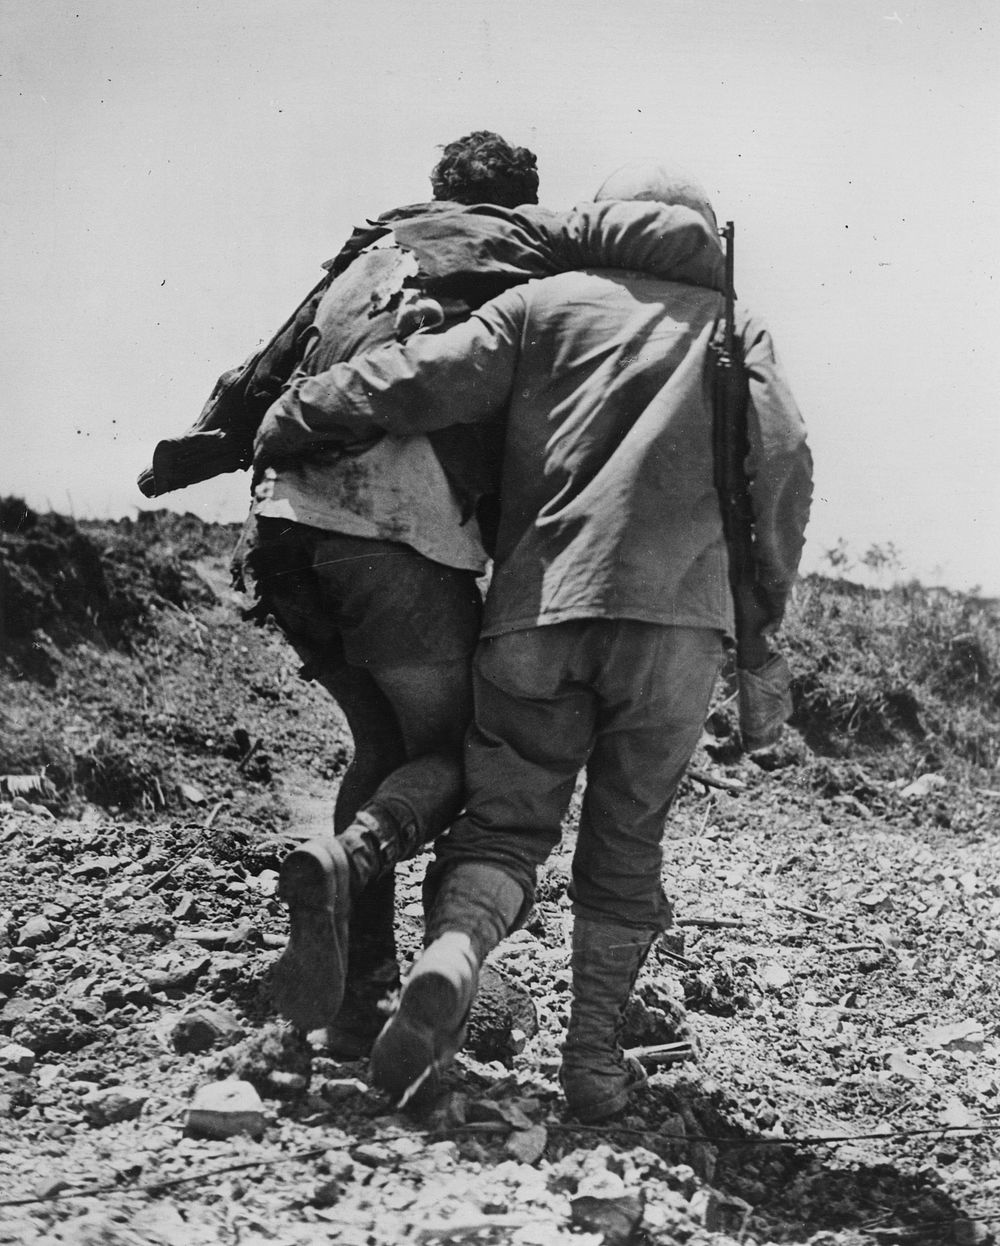 V-E Day, Okinawa Style - This marine observed V-E Day on Okinawa by having his clothing blown from his back by a Jap[anese]…